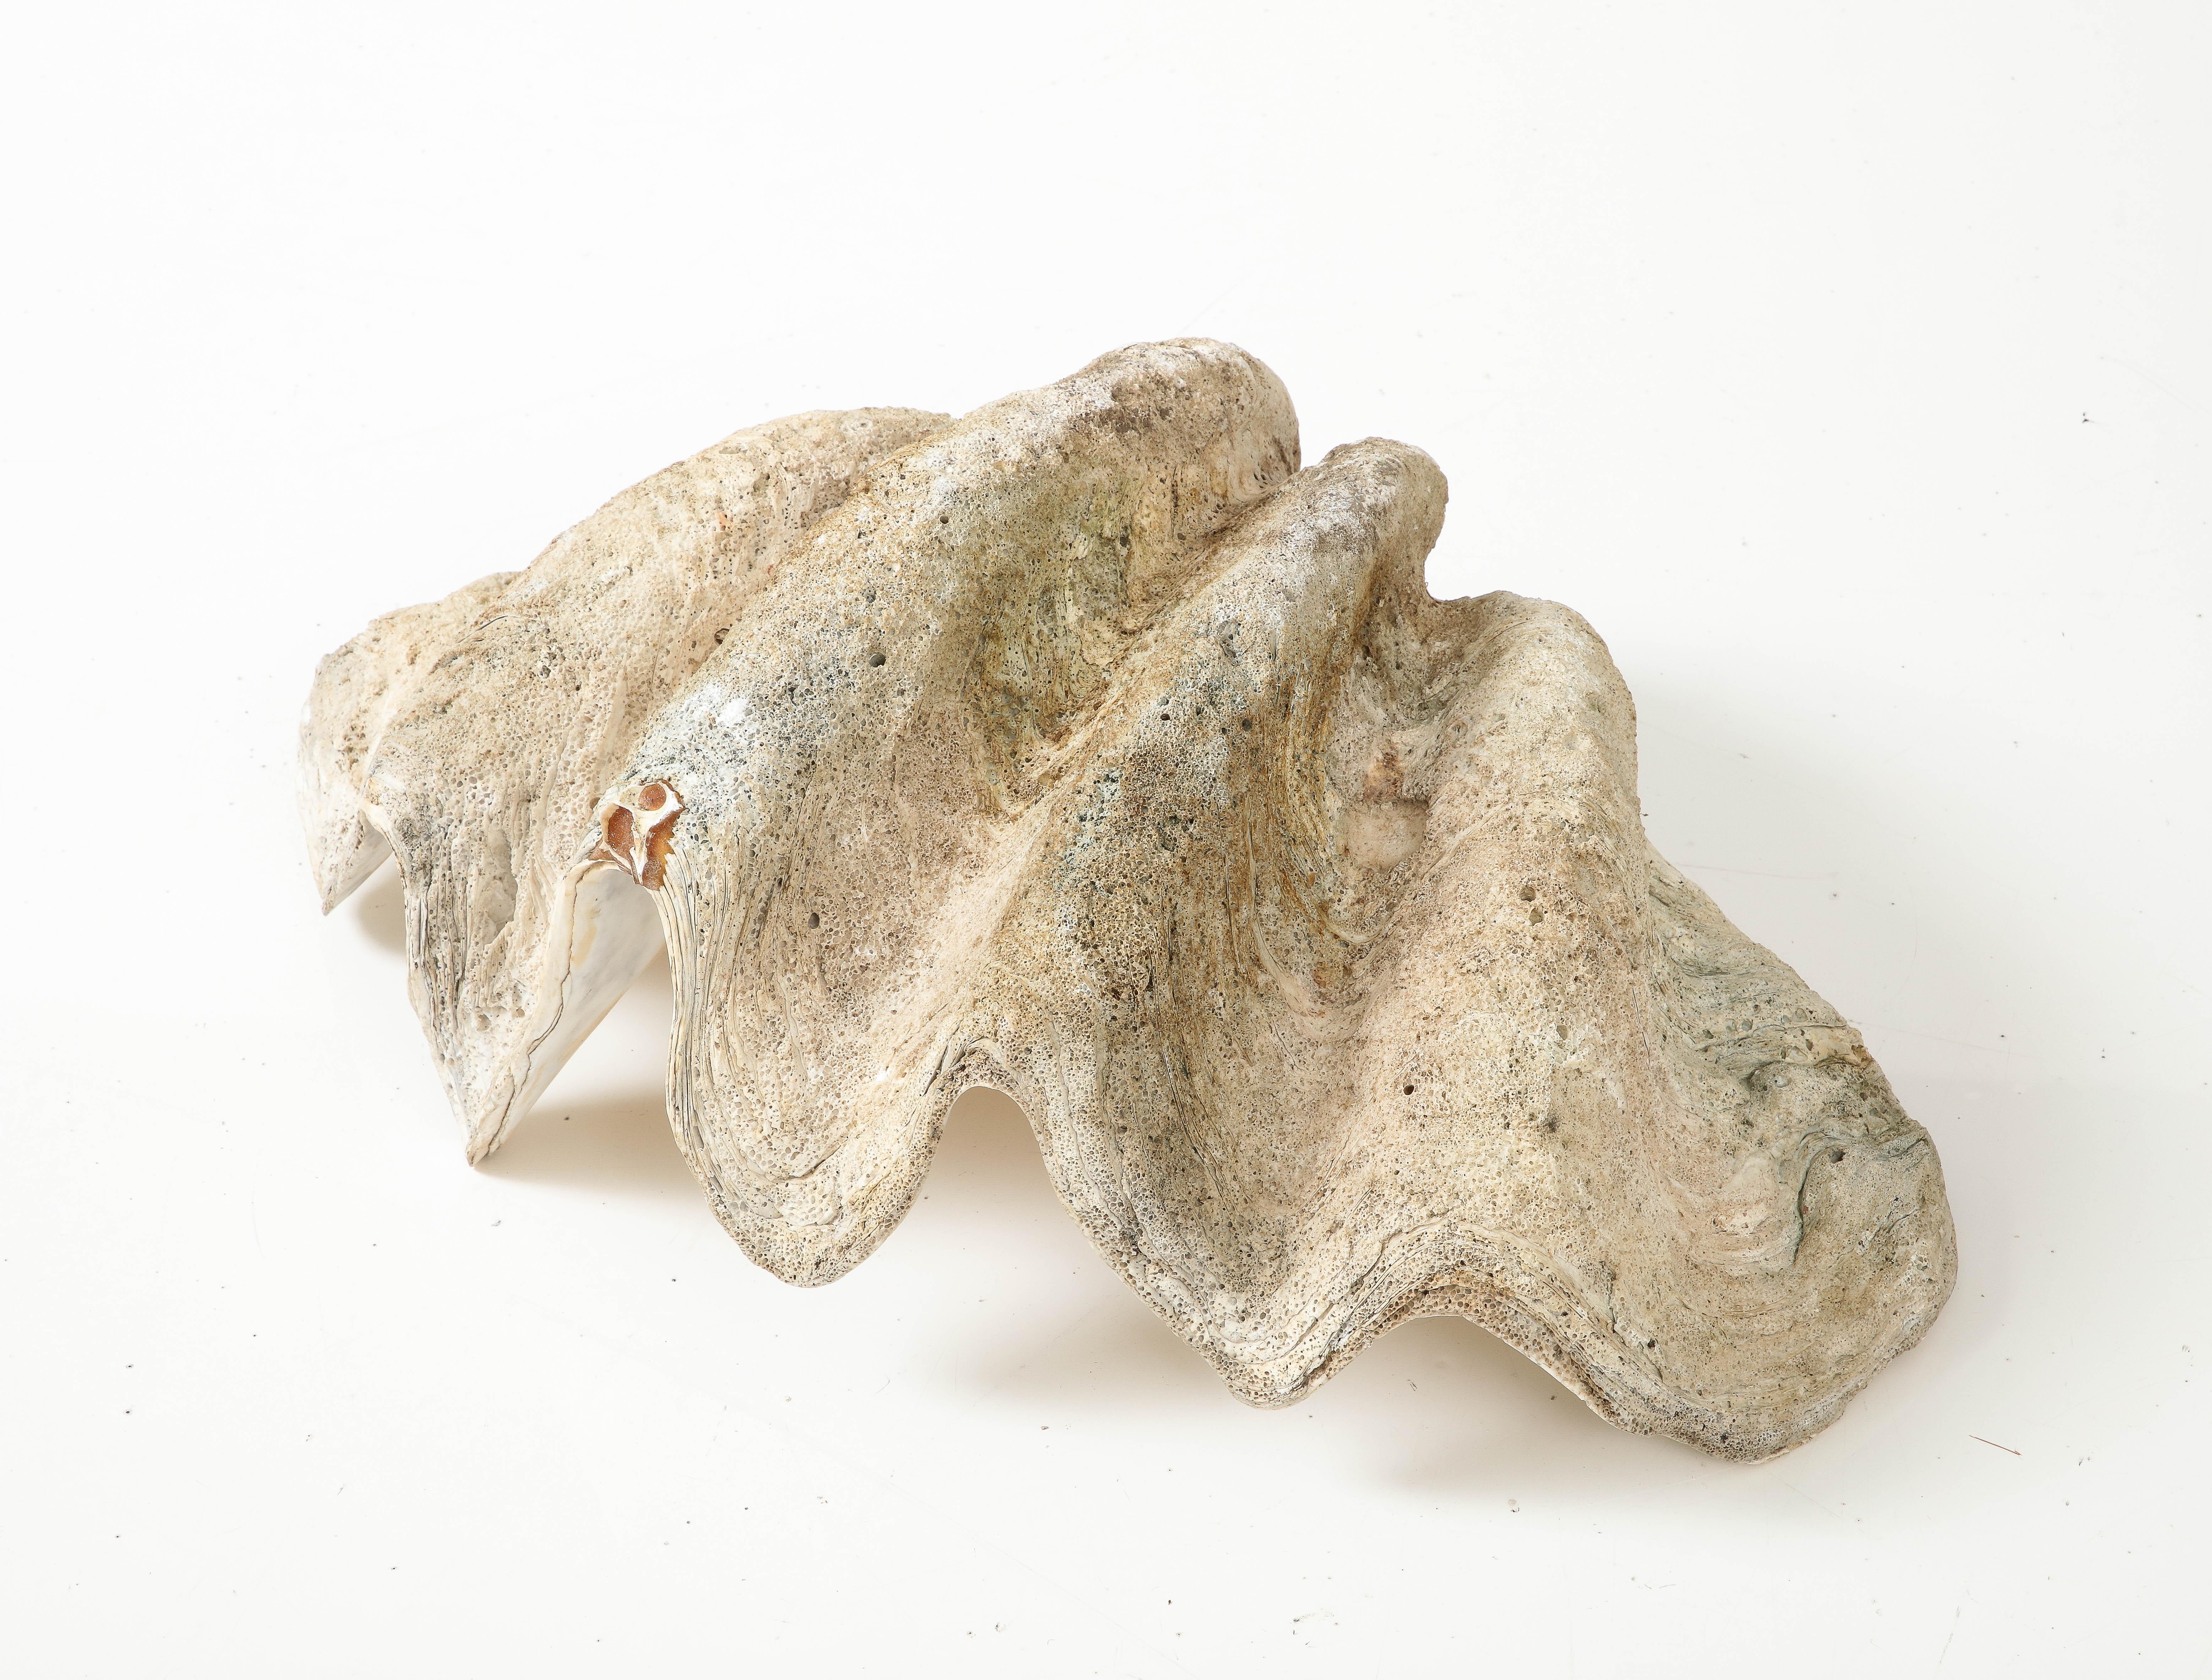 Exceptionnel grand coquillage ancien « Tridacna Gigas » « Giant Clam », océan Pacifique 8